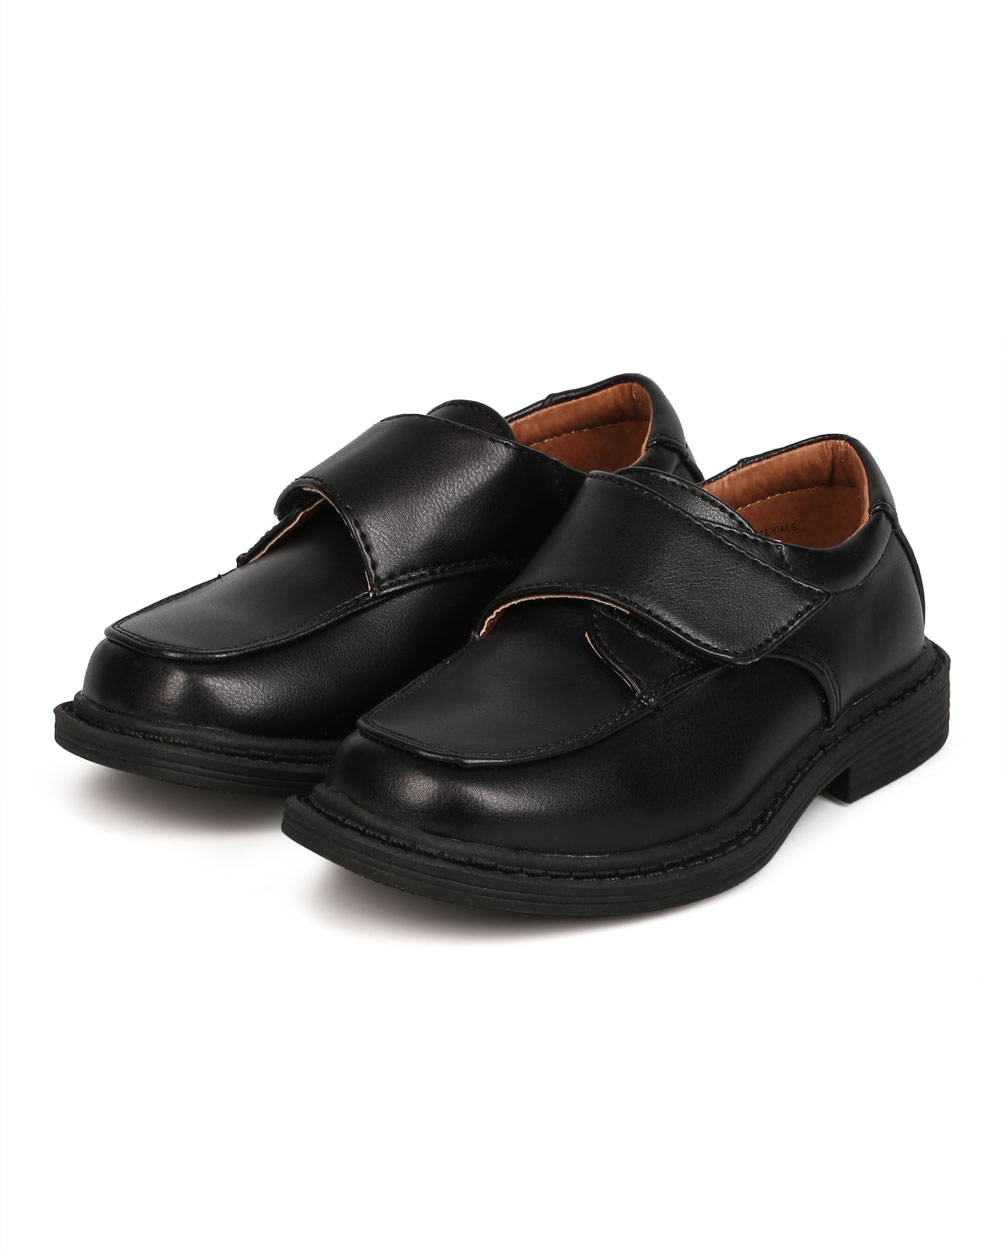 New Boy School Rider Ricky-913F Leatherette Square Toe Banded Dress Shoe - image 5 of 5